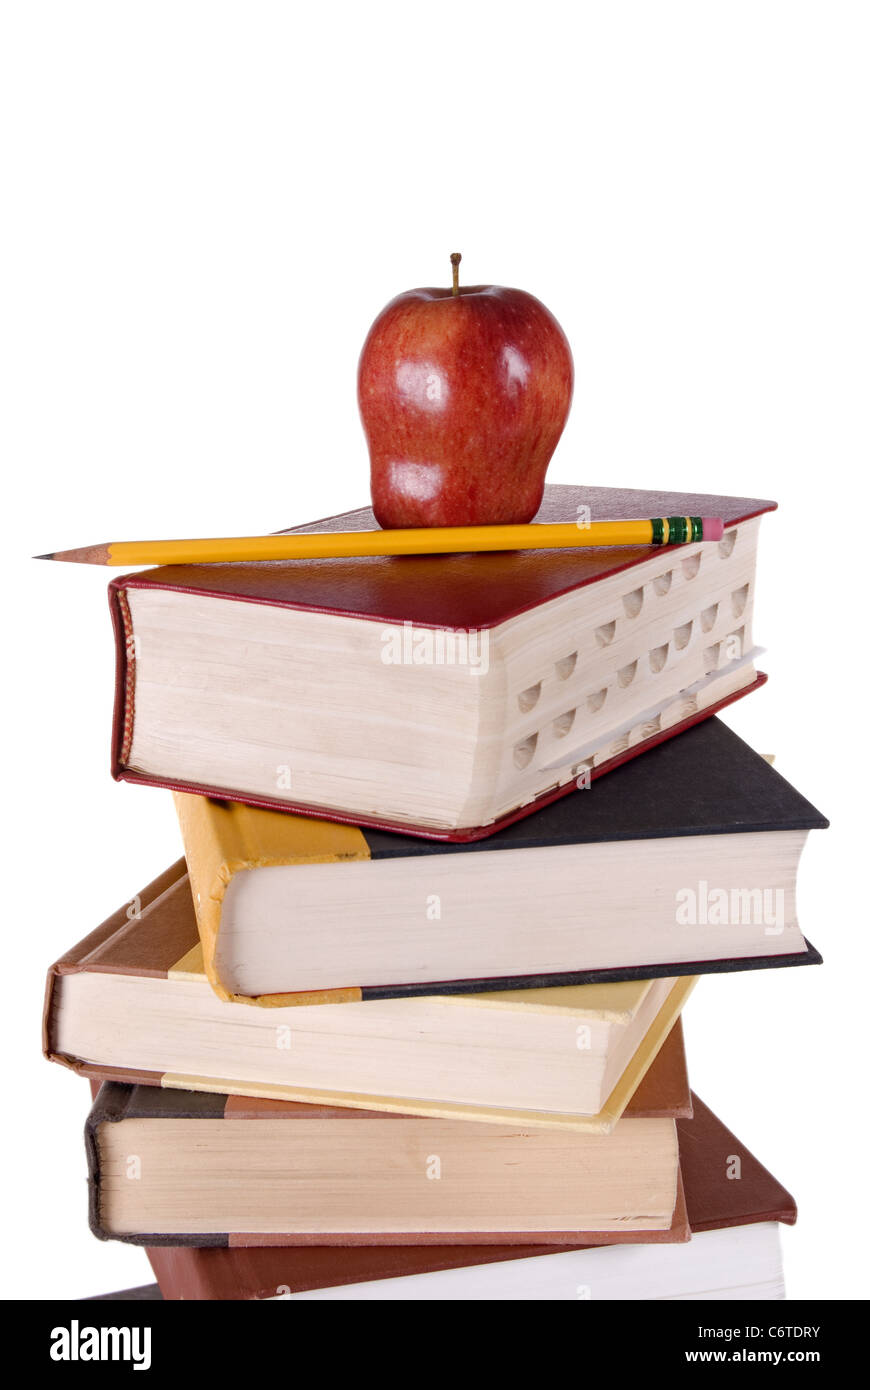 Stack of colorful hardbound books stacked vertically with a red apple and yellow pencil on the top book. Stock Photo